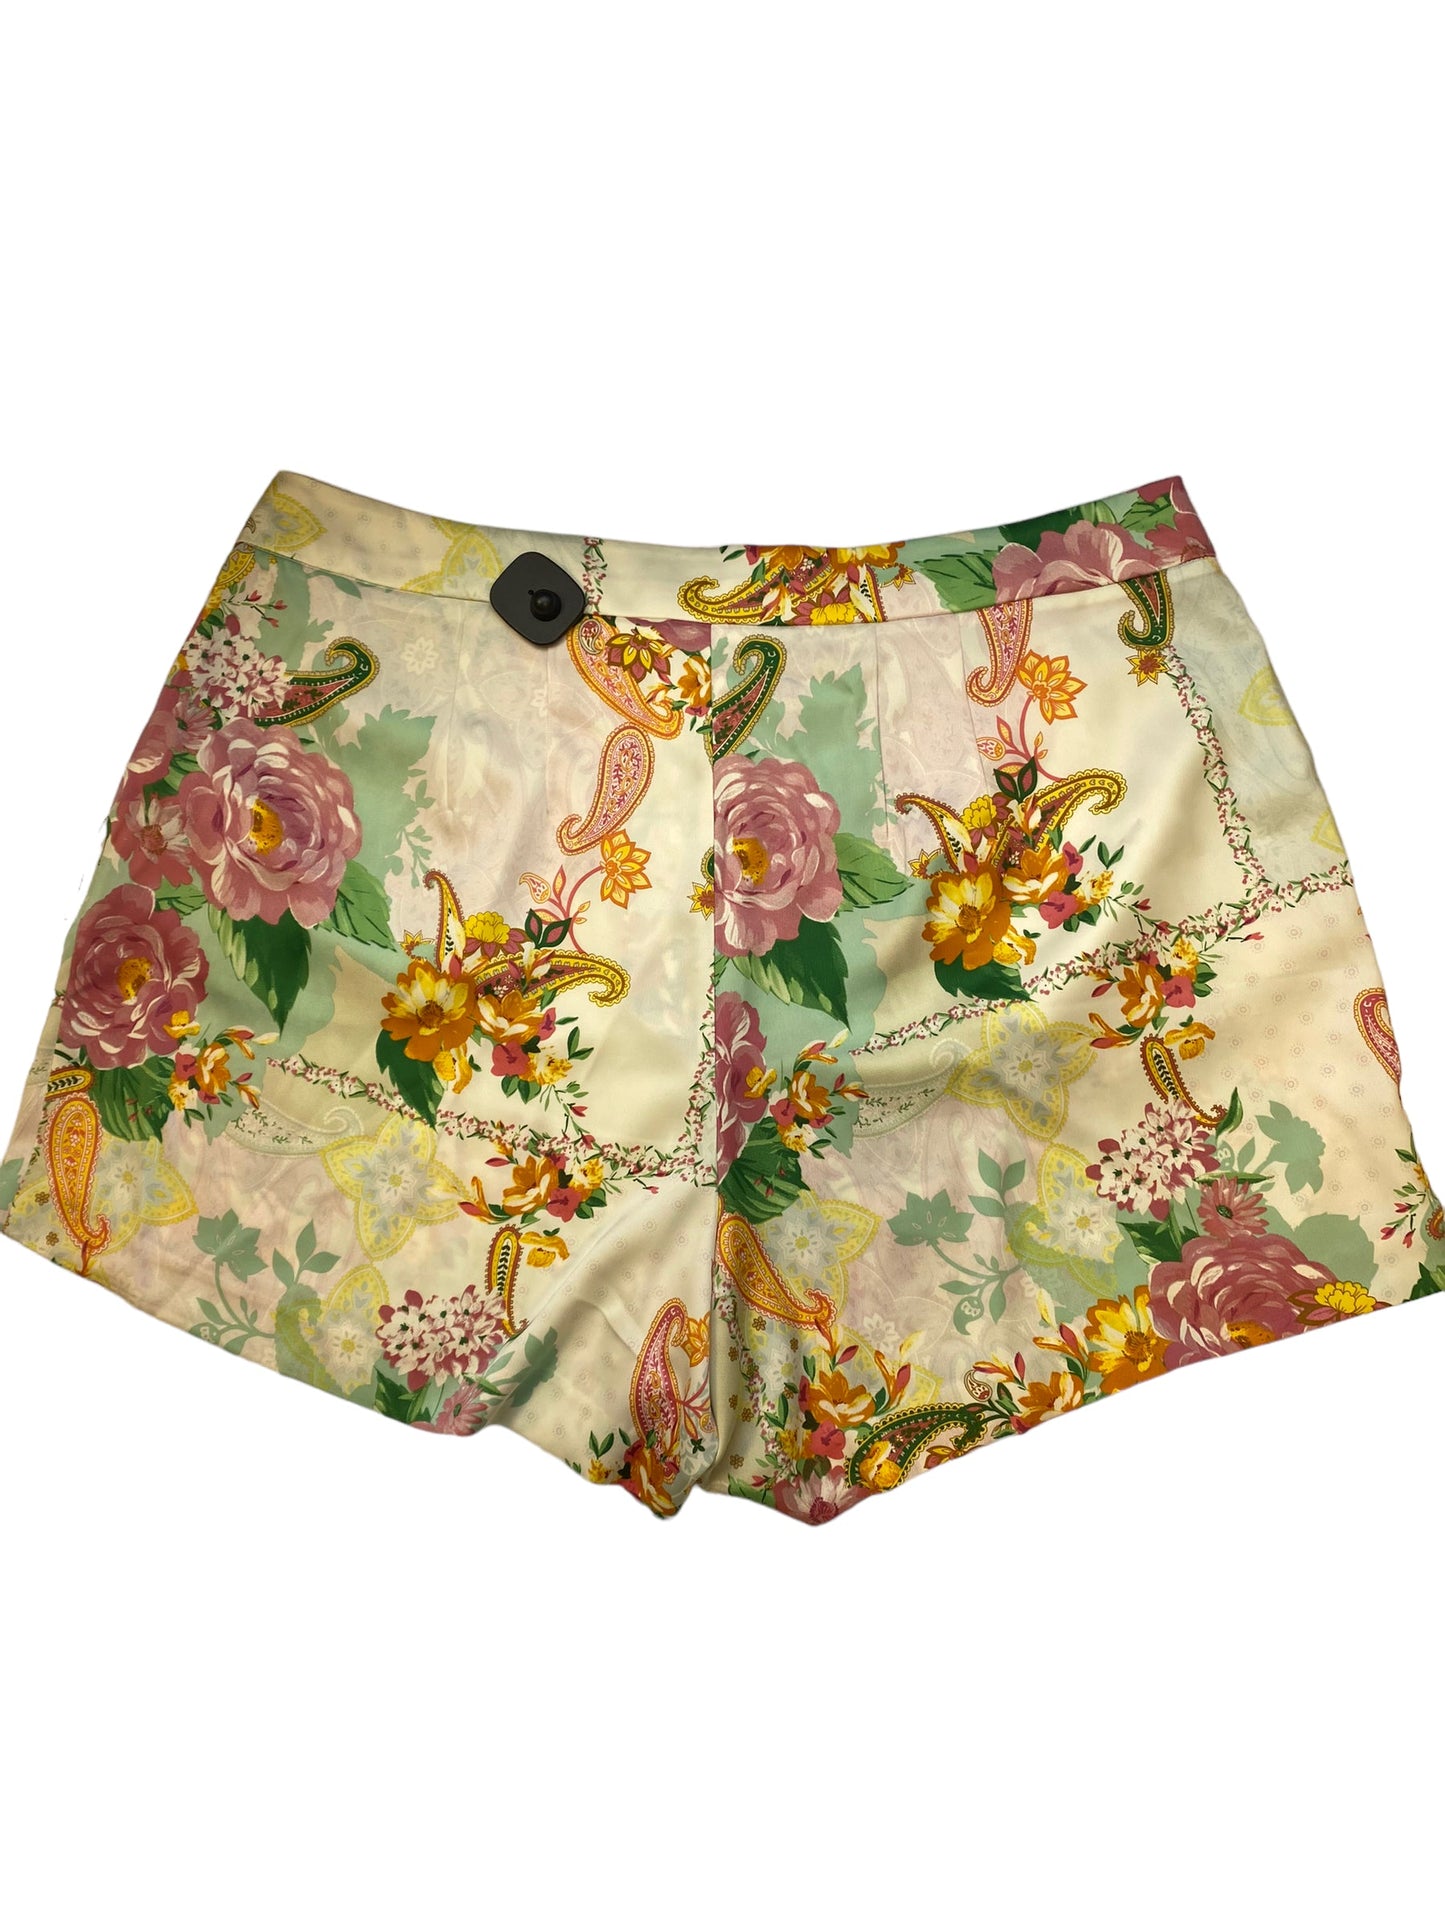 Shorts By Eloquii  Size: 1x